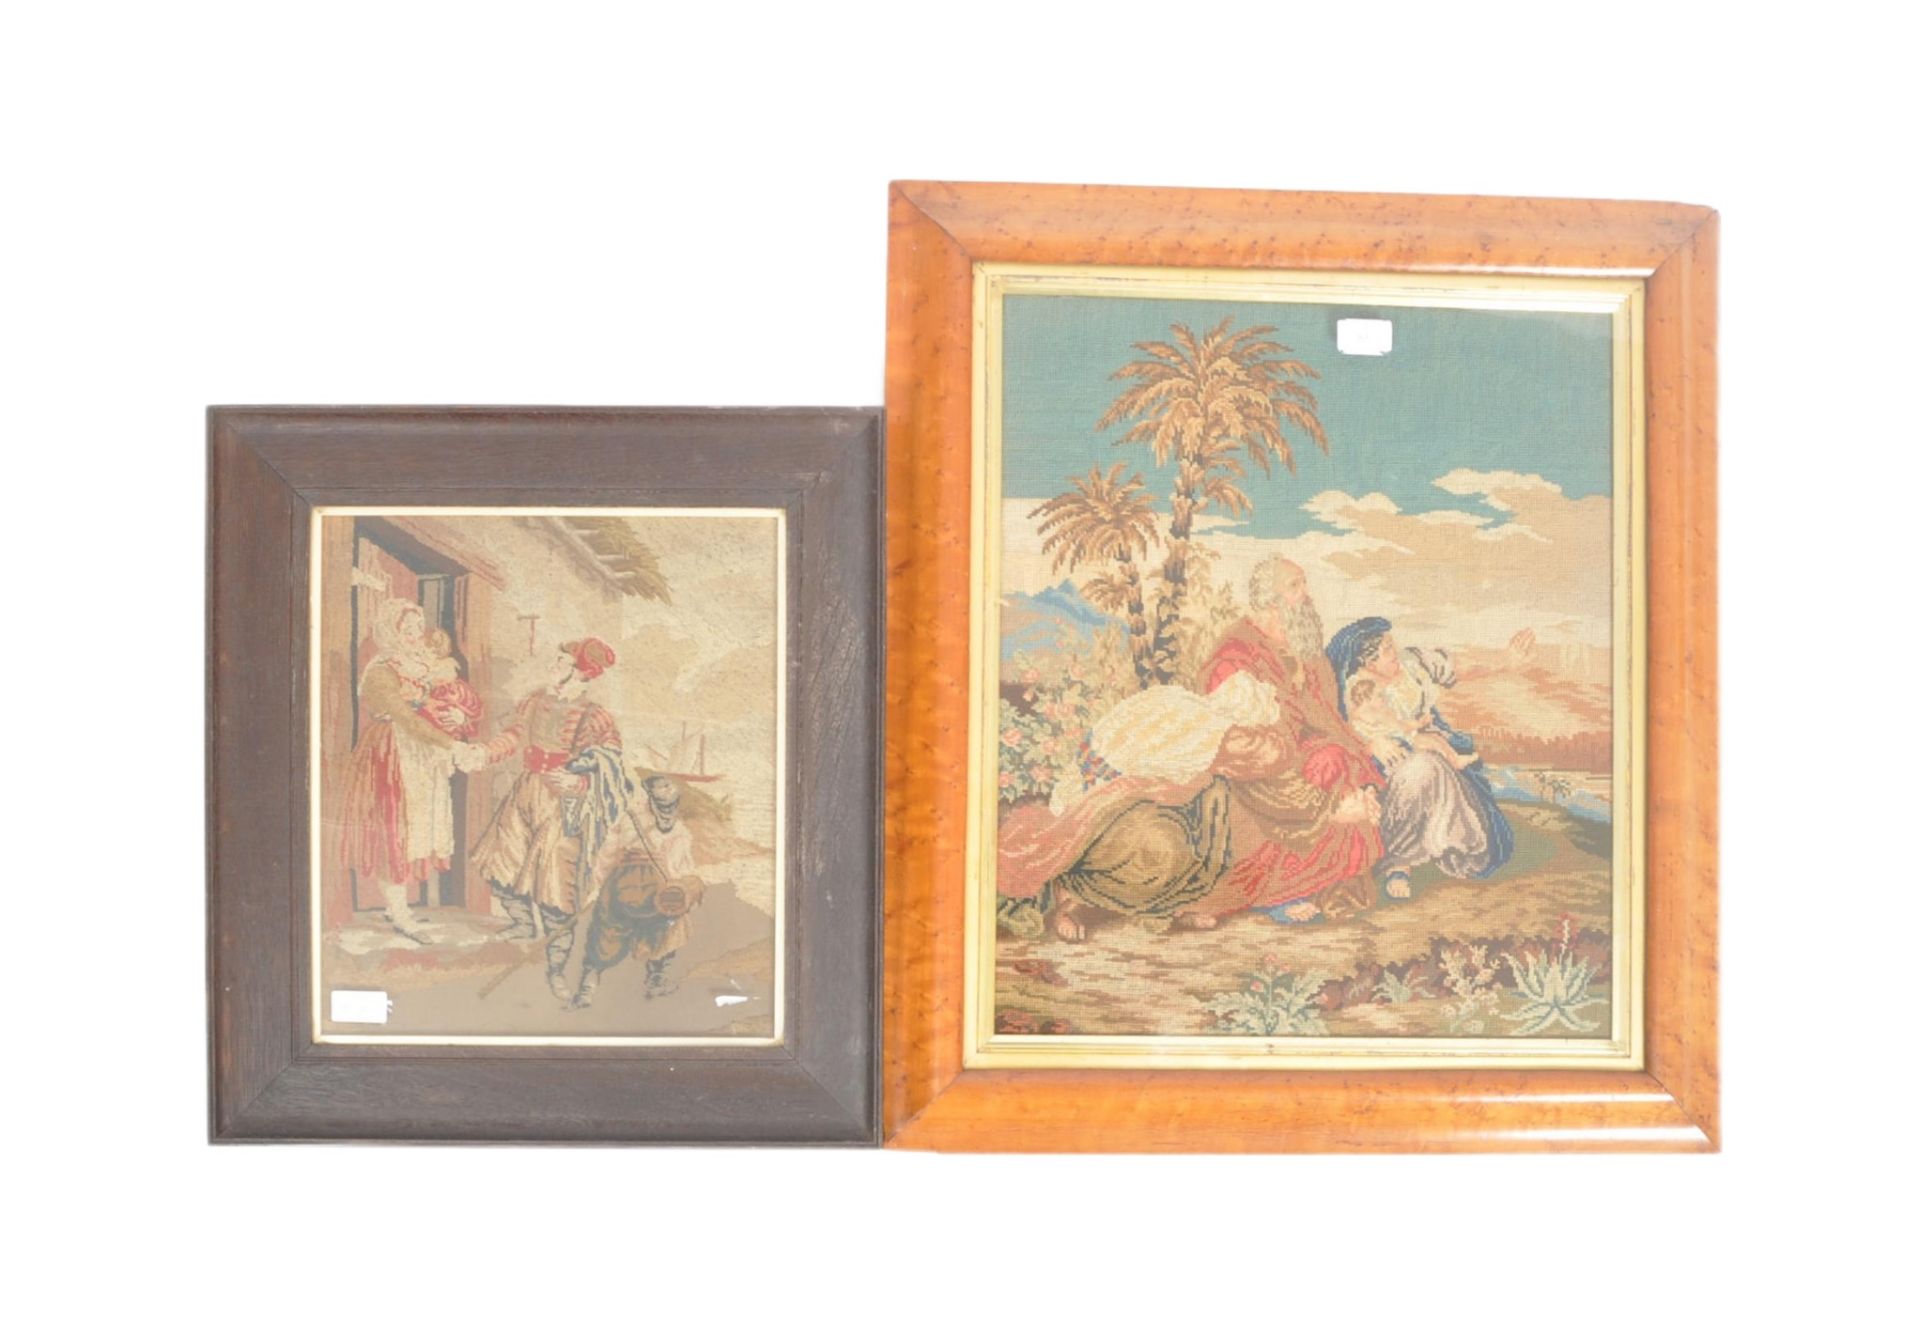 TWO EARLY 20TH CENTURY EMBROIDERY NEEDLEPOINT PICTURES